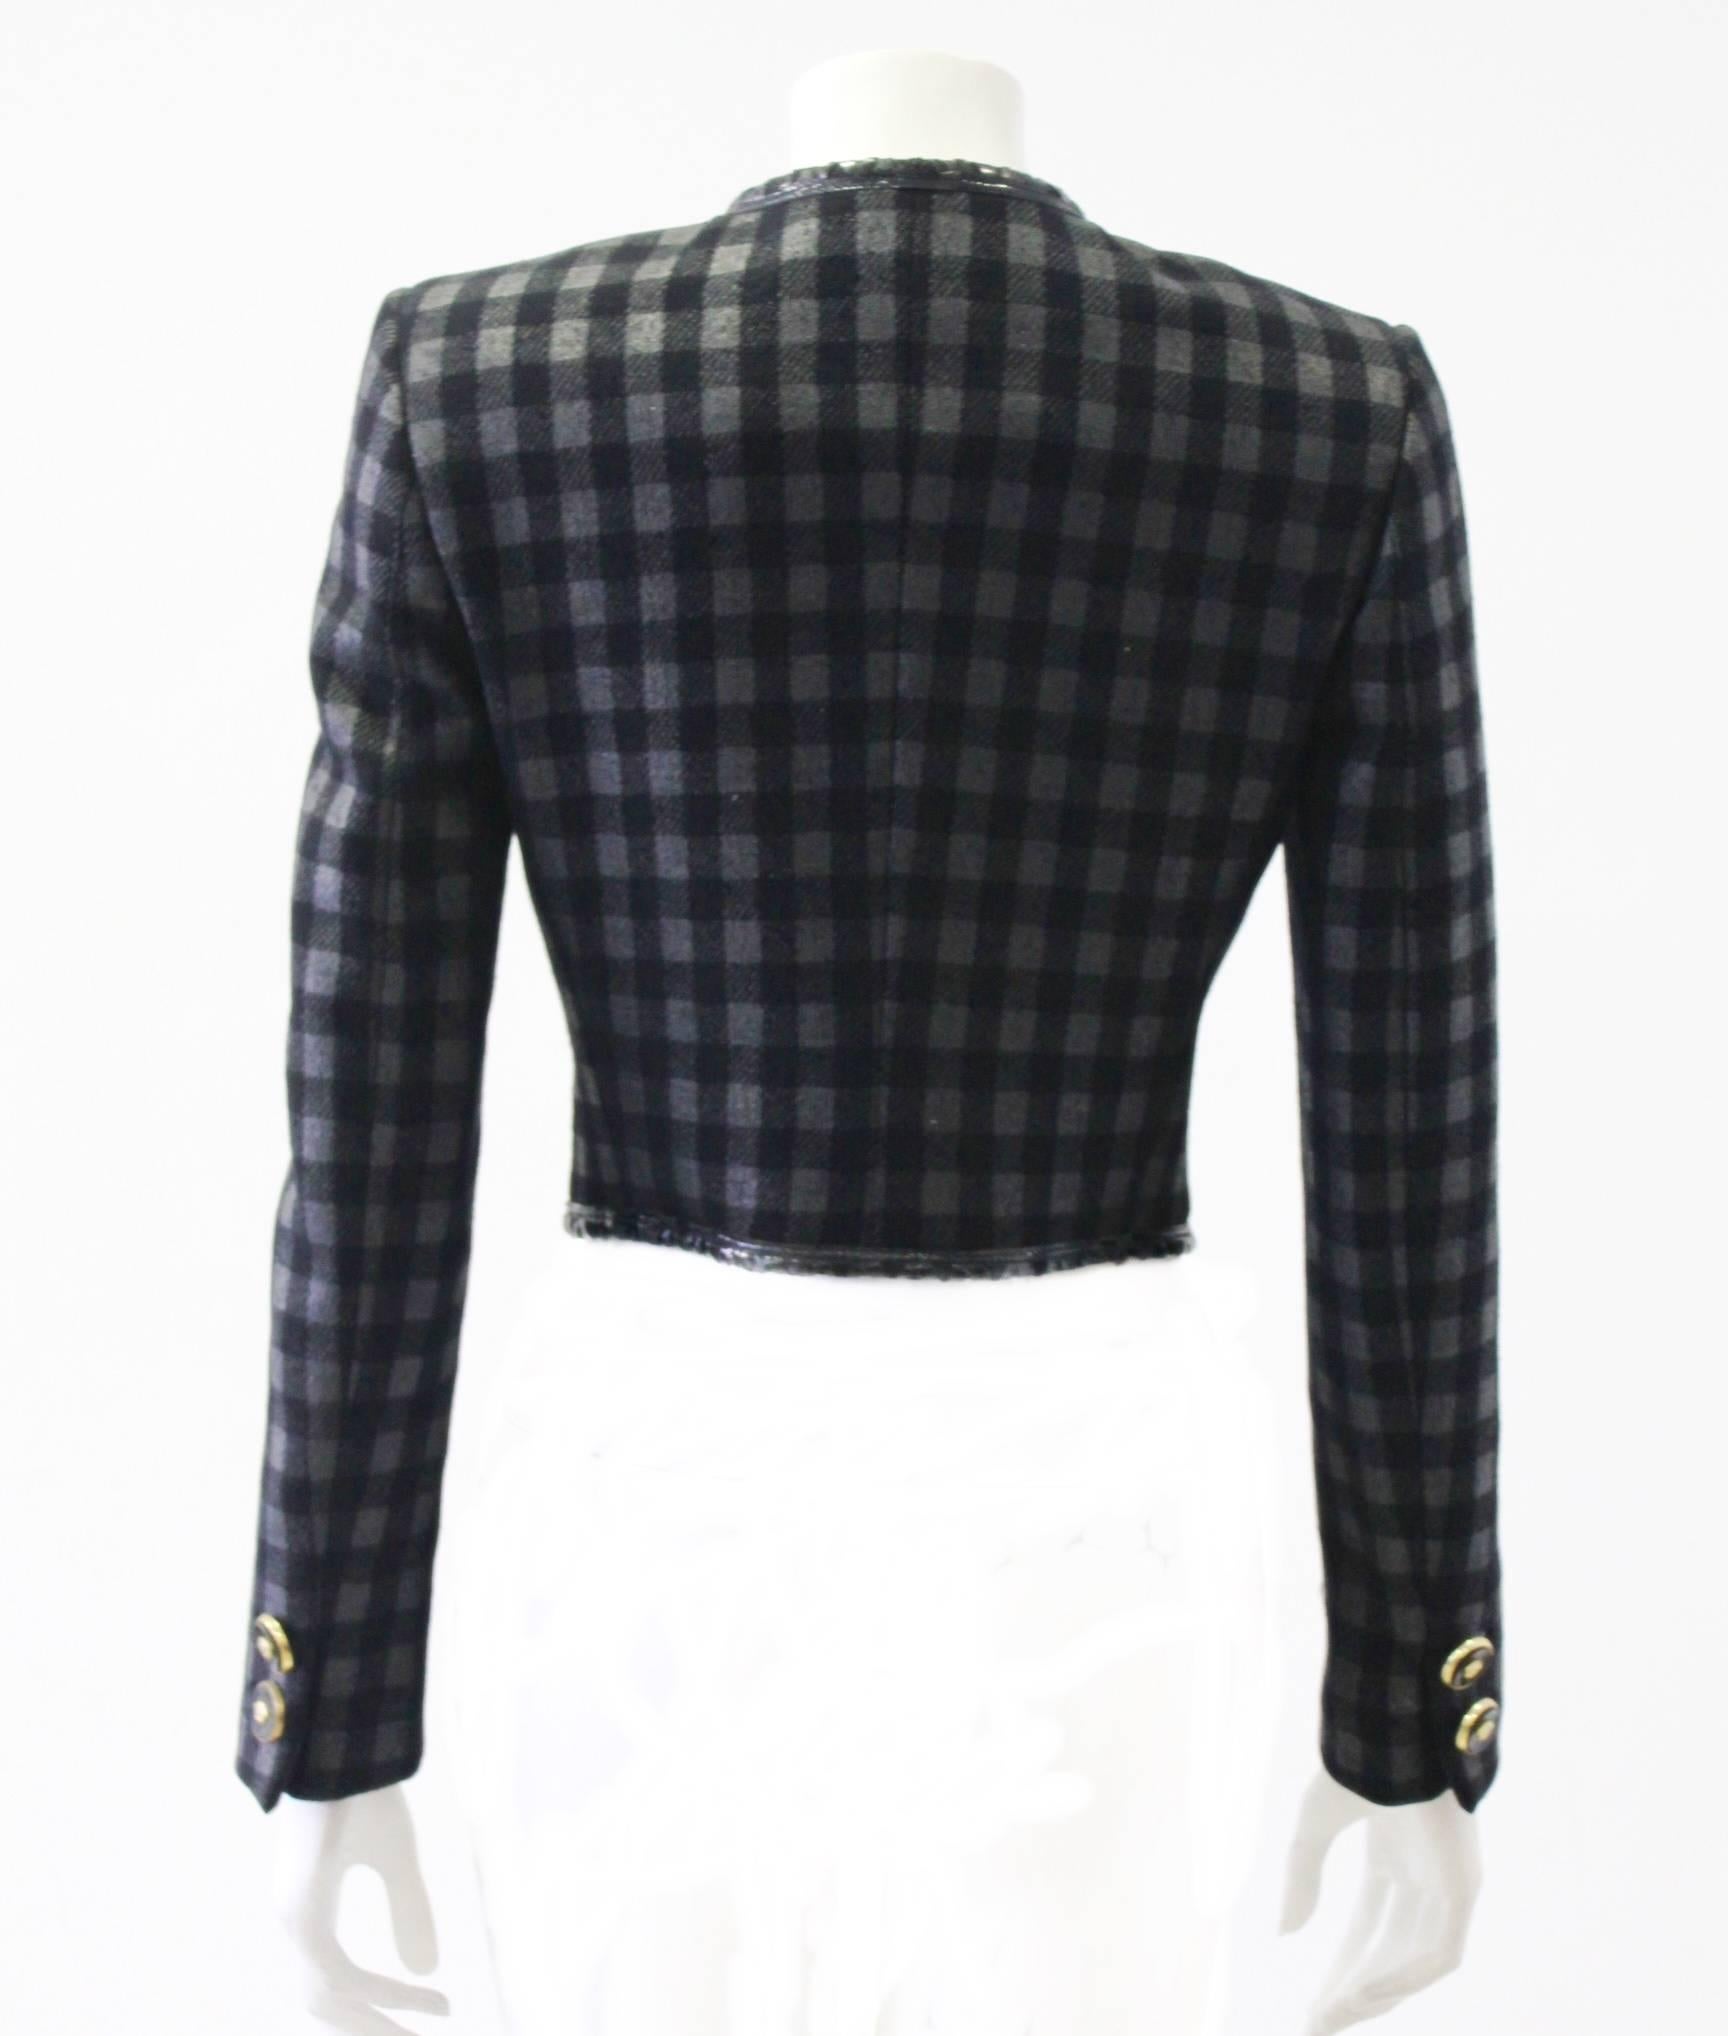 Black Rare Gianni Versace Couture Metallic Checked Jacket With Patent Leather 1995 For Sale